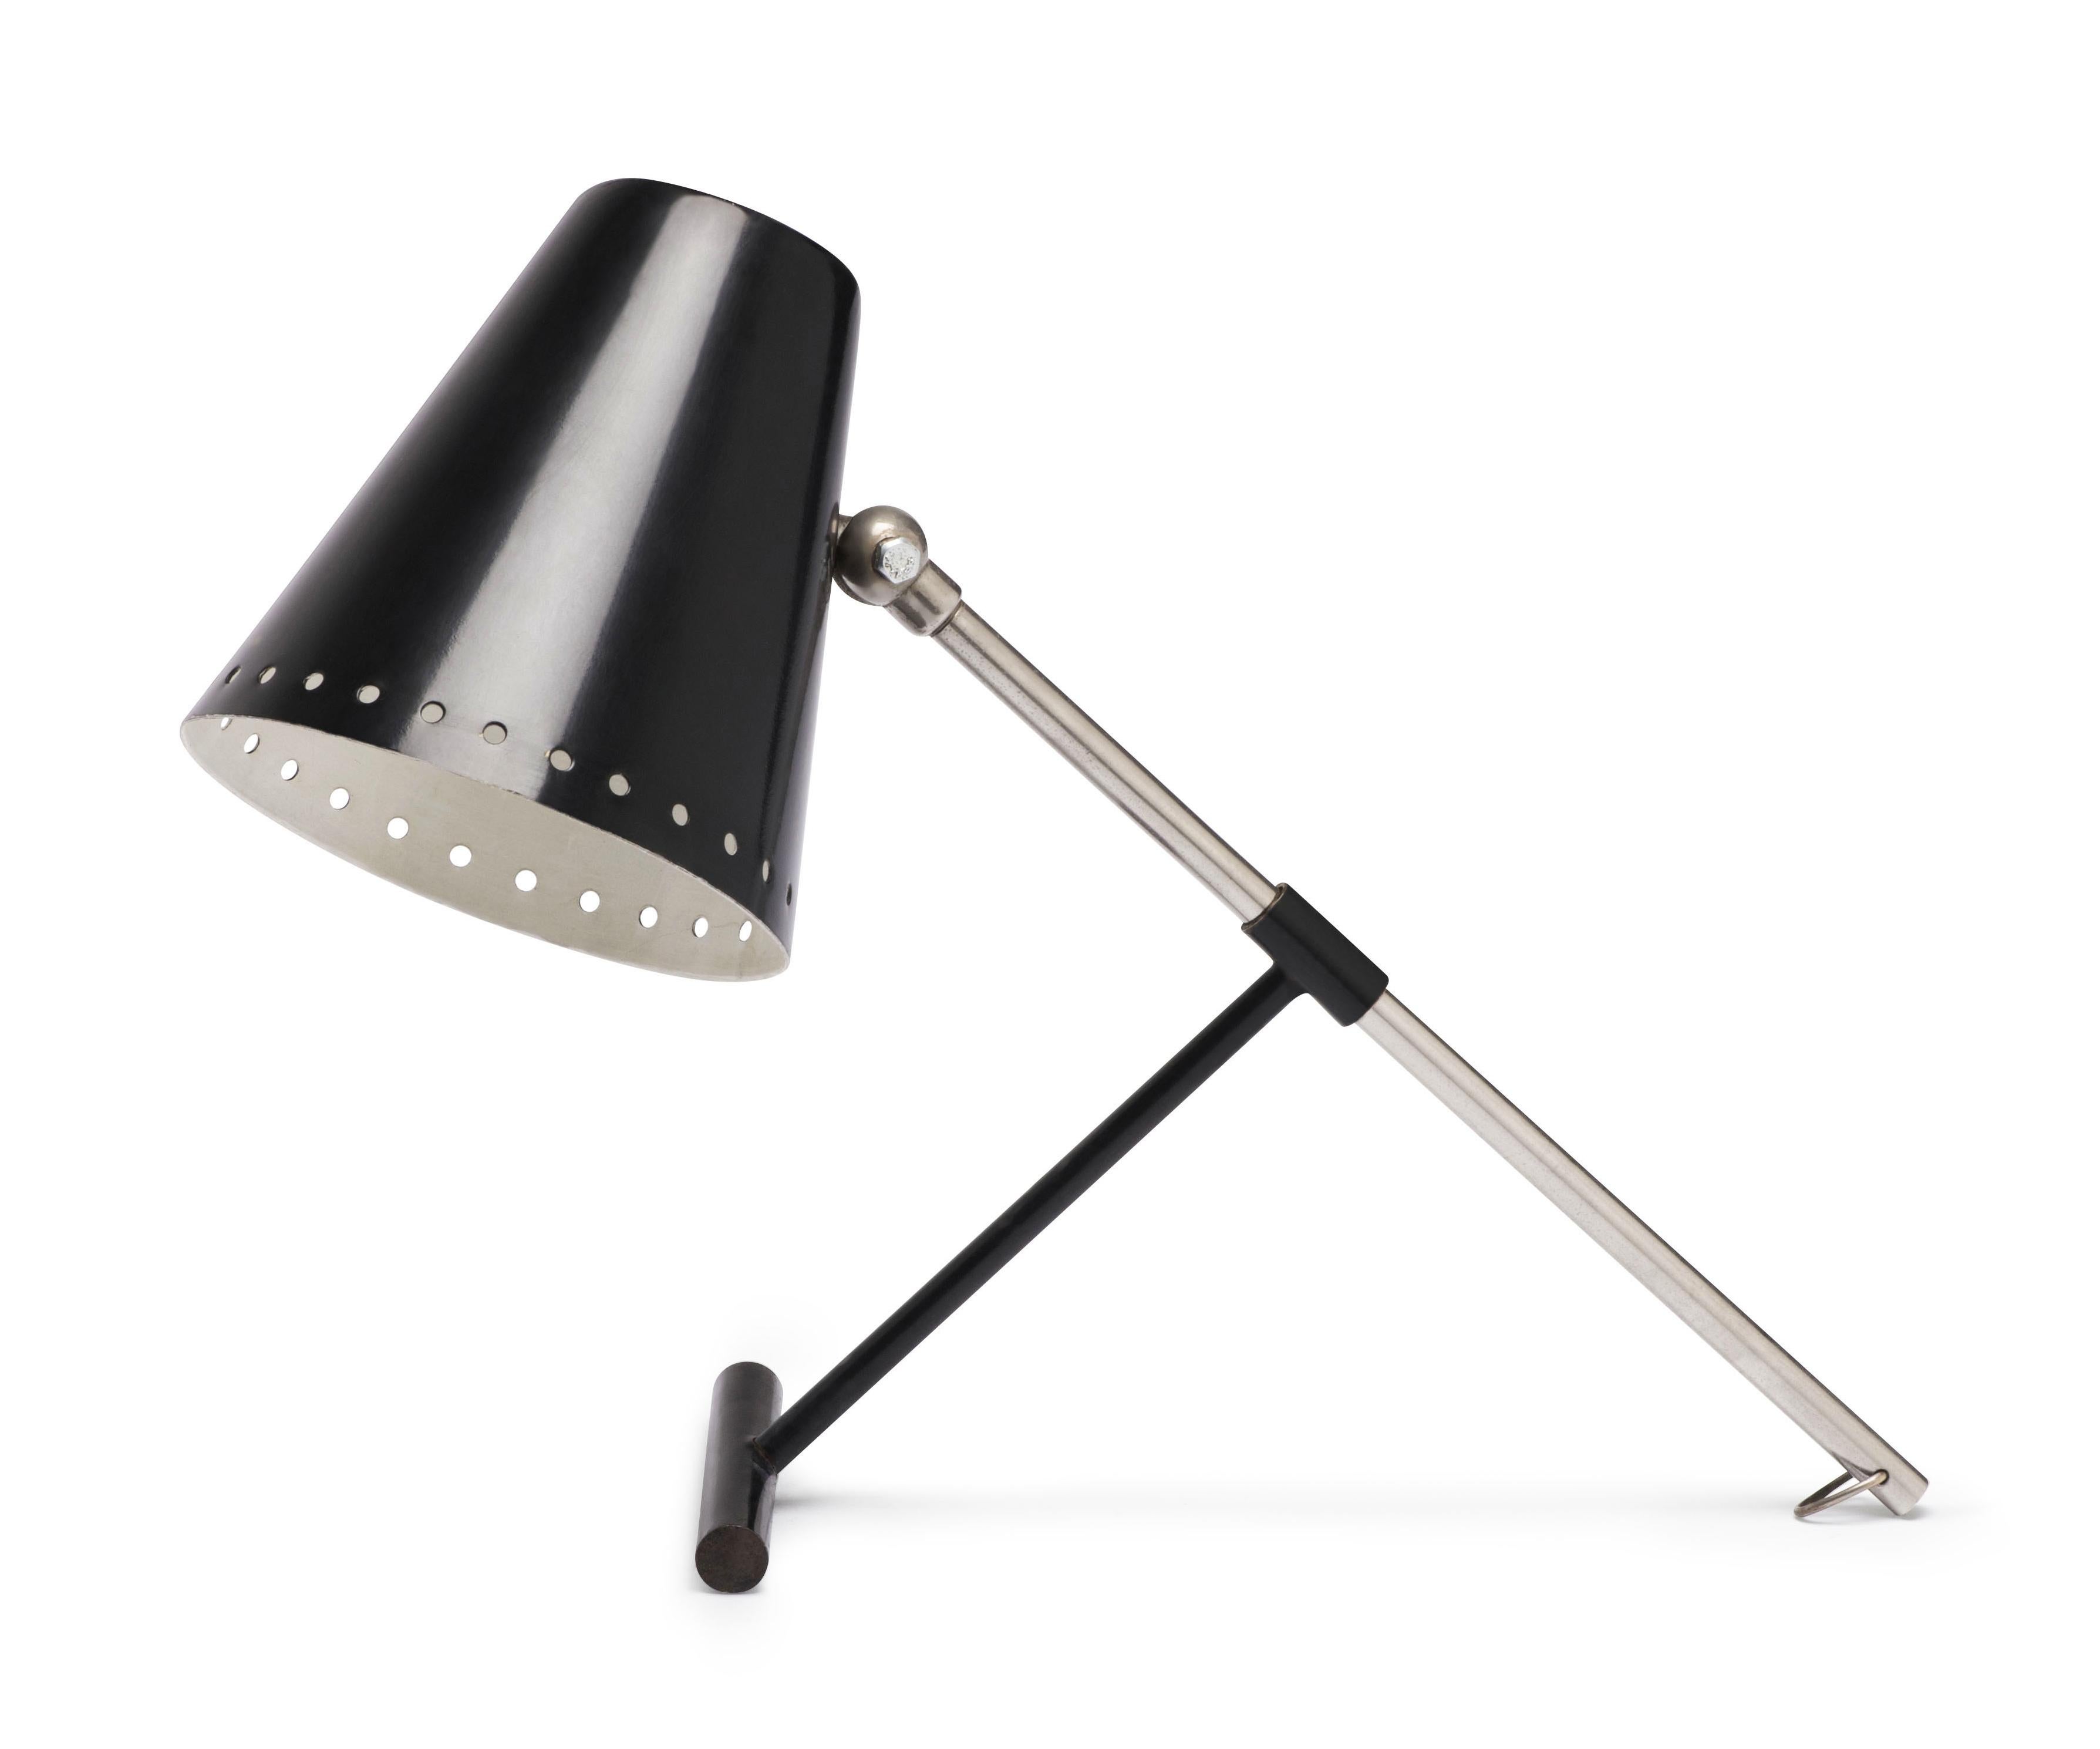 Classic mid-century European table or wall lamp.

Fiedeldij was known for his modern, abstract designs, inspired by art movements such as De Stijl and Bauhaus. His creations were often characterized by the use of simple geometric shapes and bright